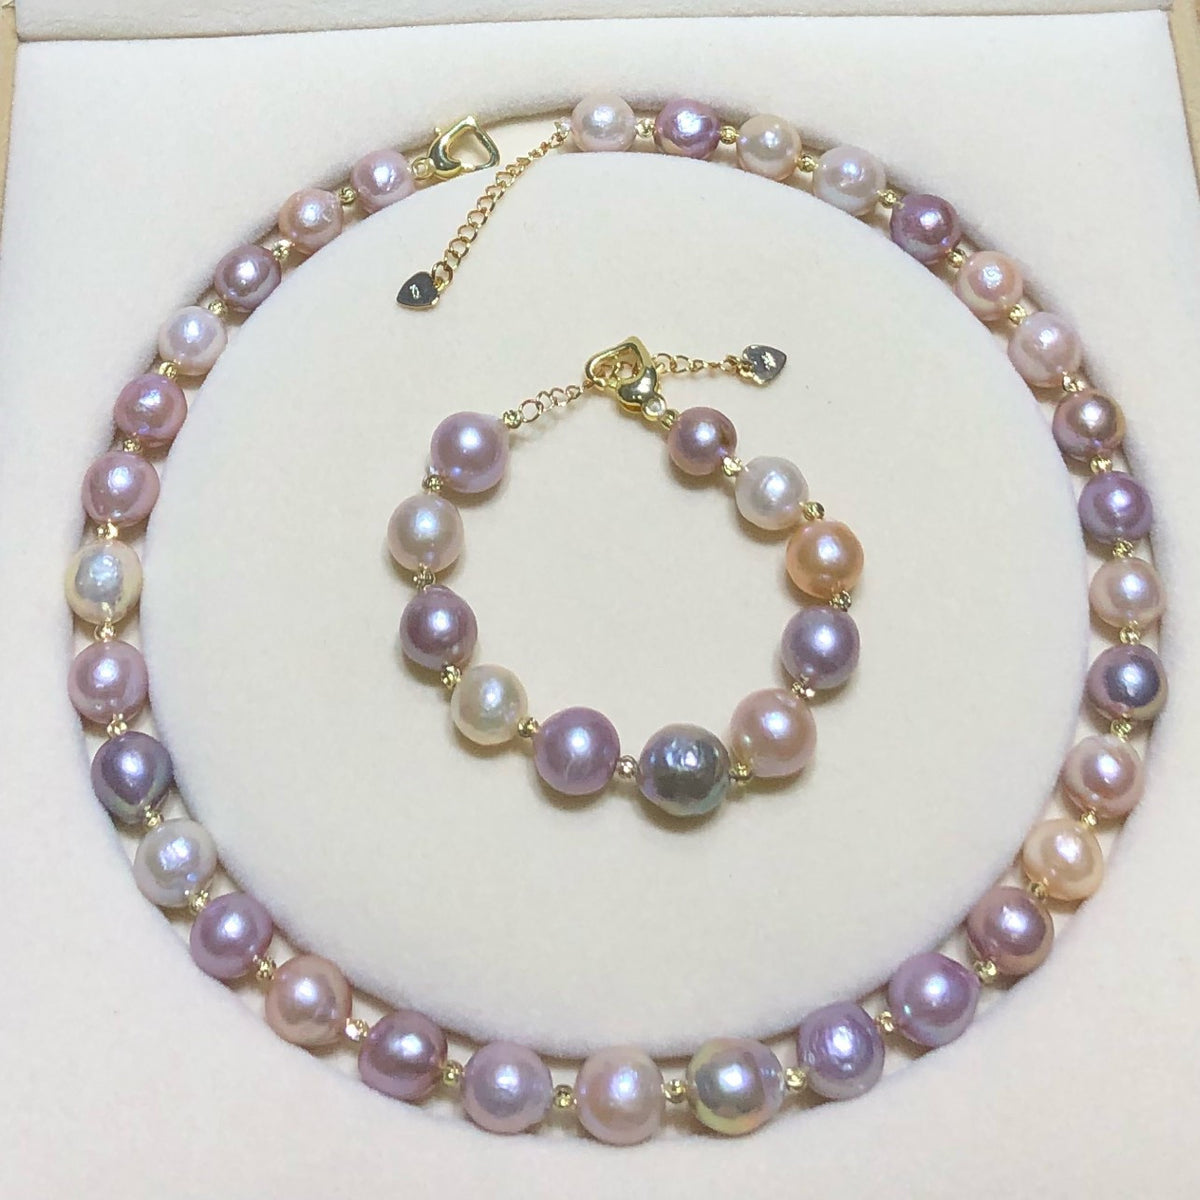 Style: Set - Natural freshwater pearl chain